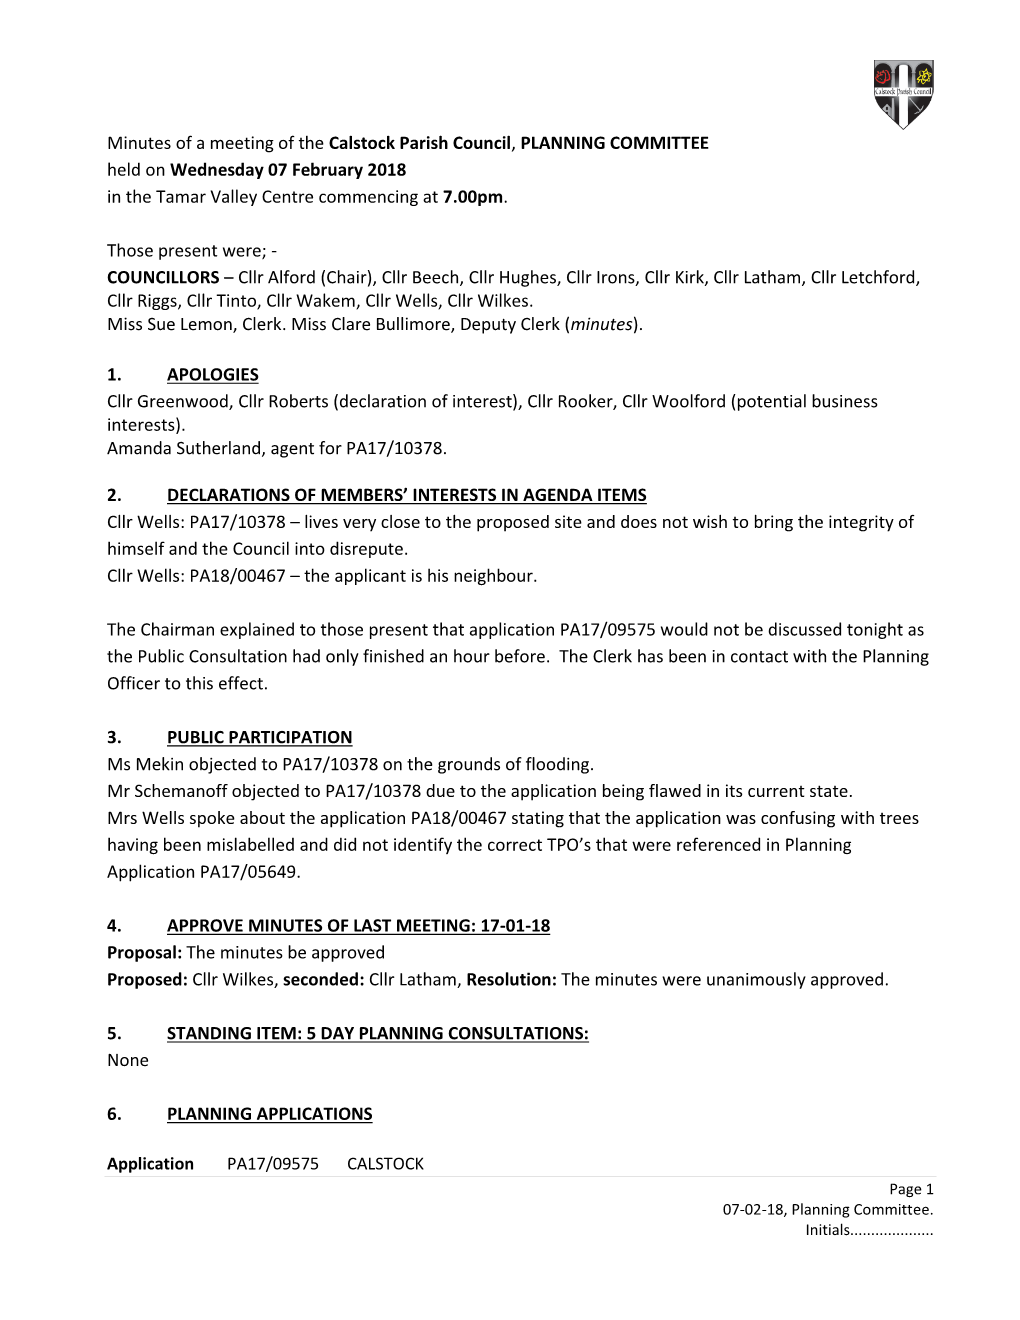 Minutes of a Meeting of the Calstock Parish Council, PLANNING COMMITTEE Held on Wednesday 07 February 2018 in the Tamar Valley Centre Commencing at 7.00Pm